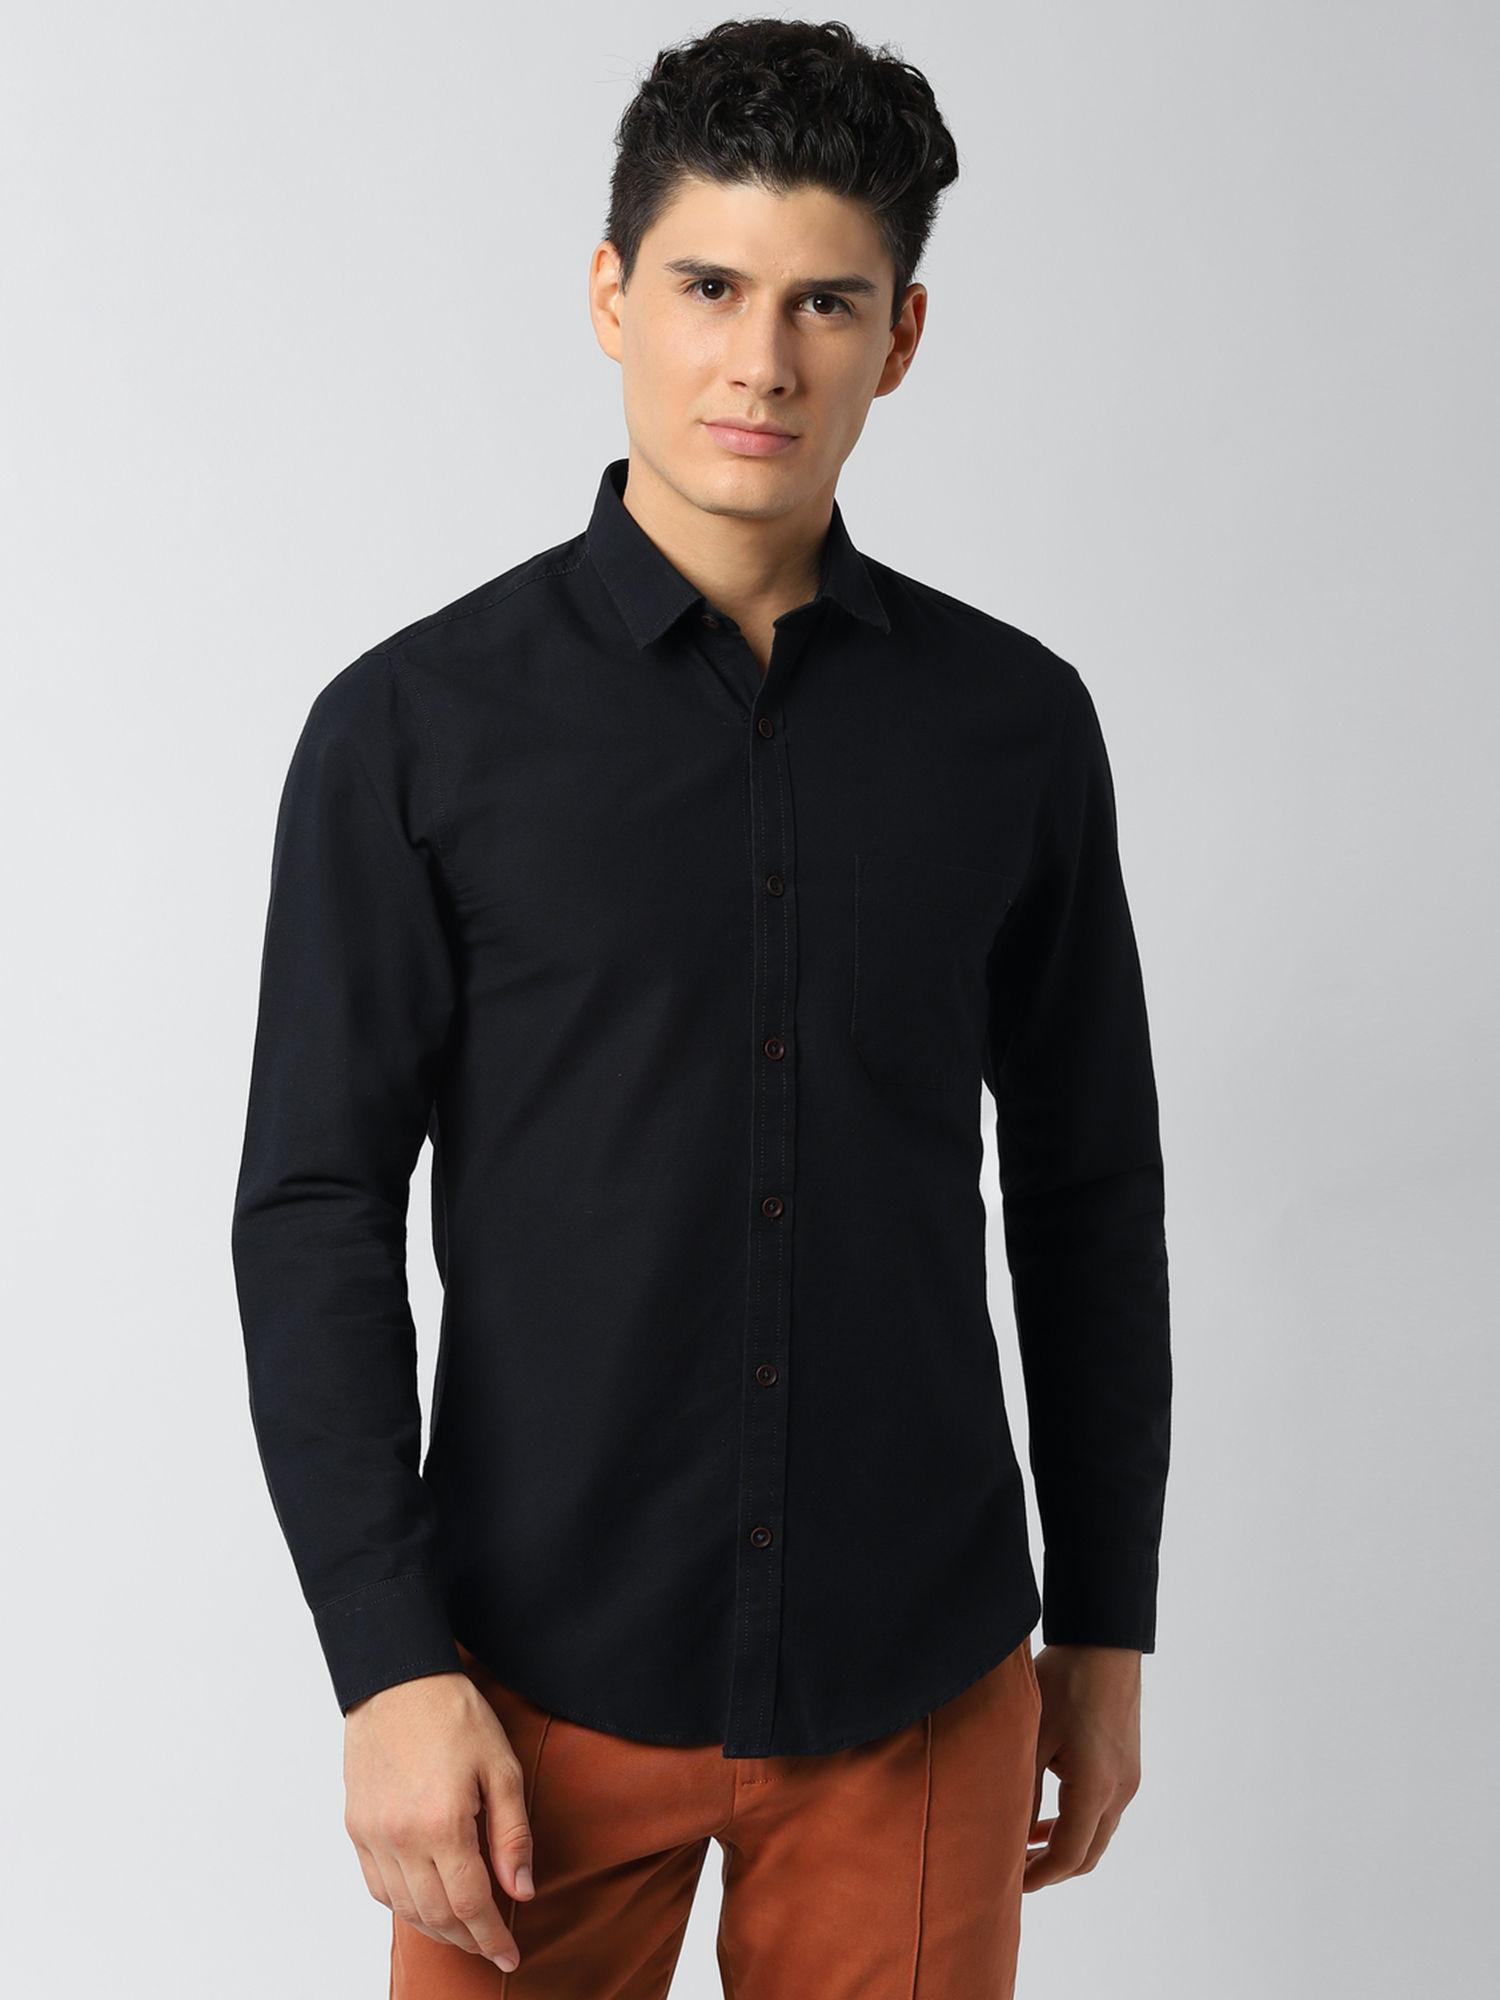 black solid full sleeves casual shirt